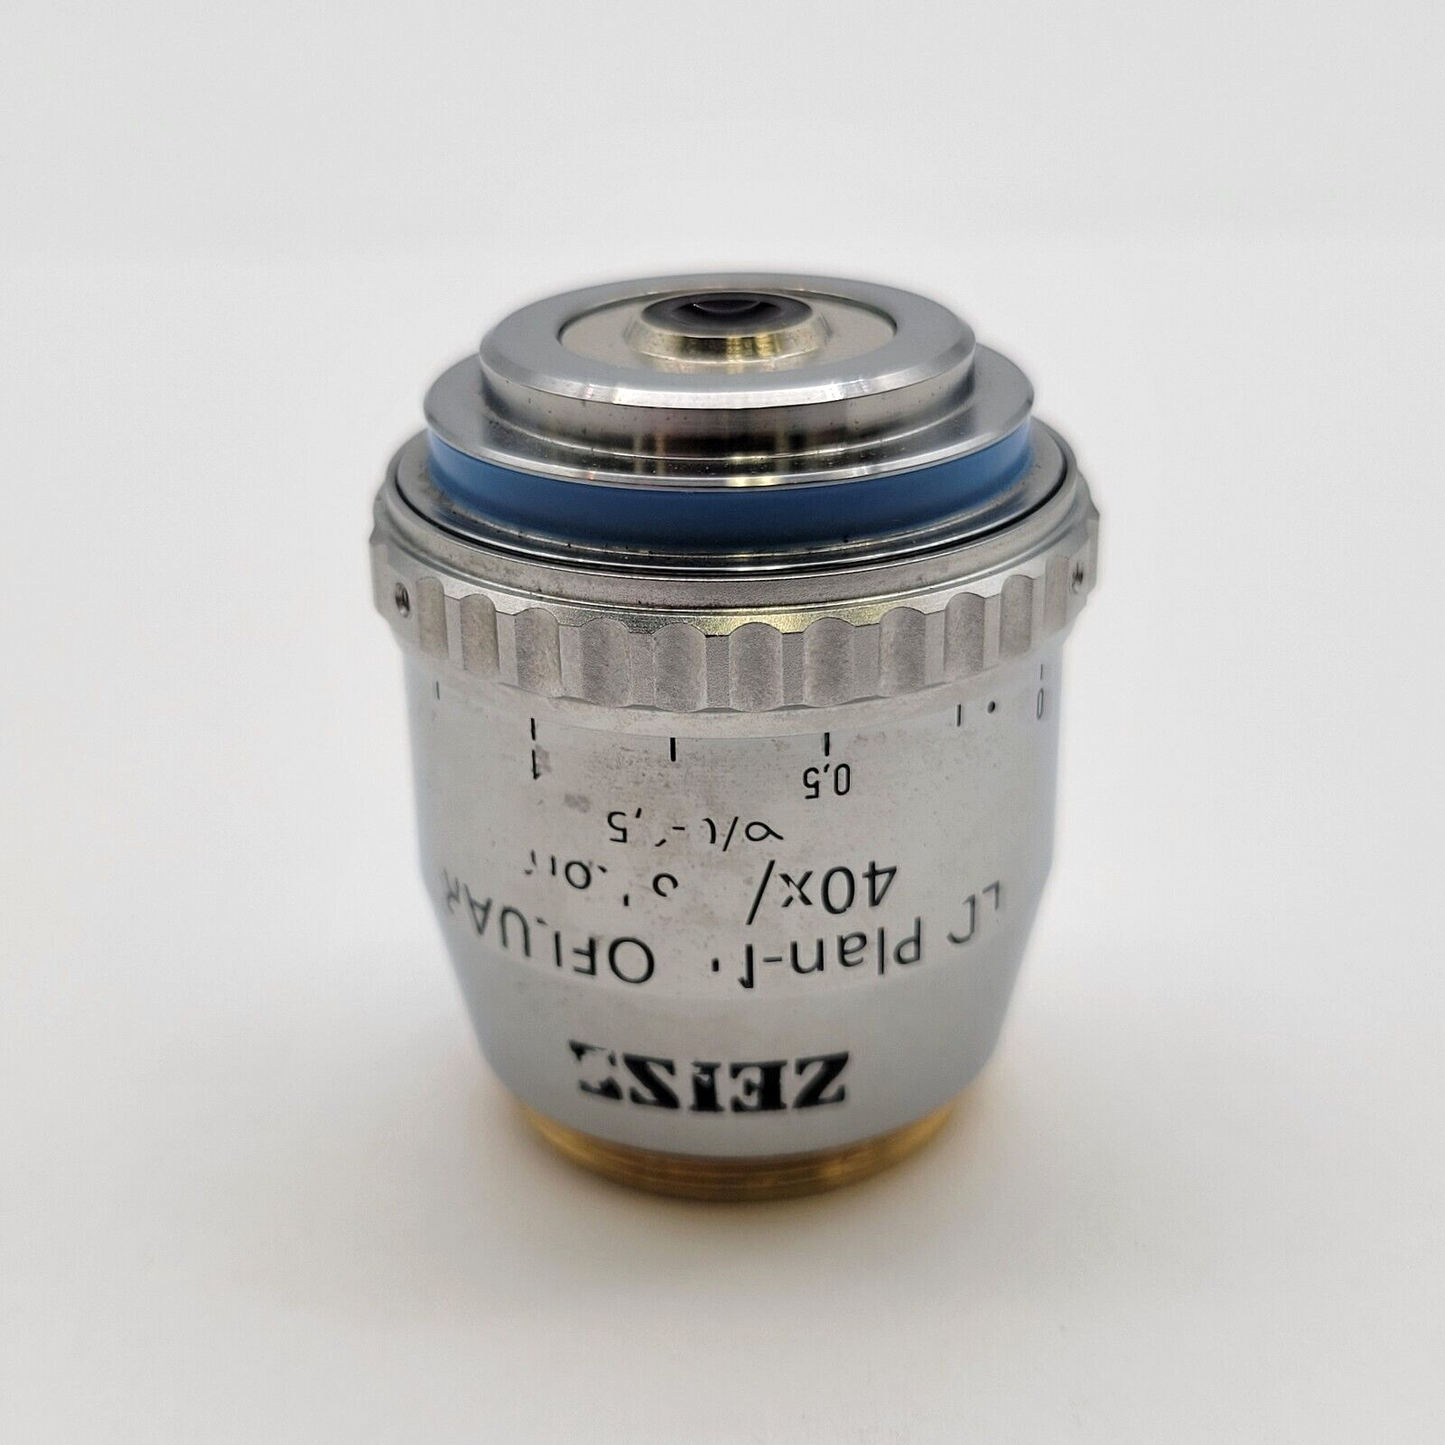 Zeiss Microscope Objective LD Plan Neofluar 40x with Correction 421360-9970 M27 - microscopemarketplace